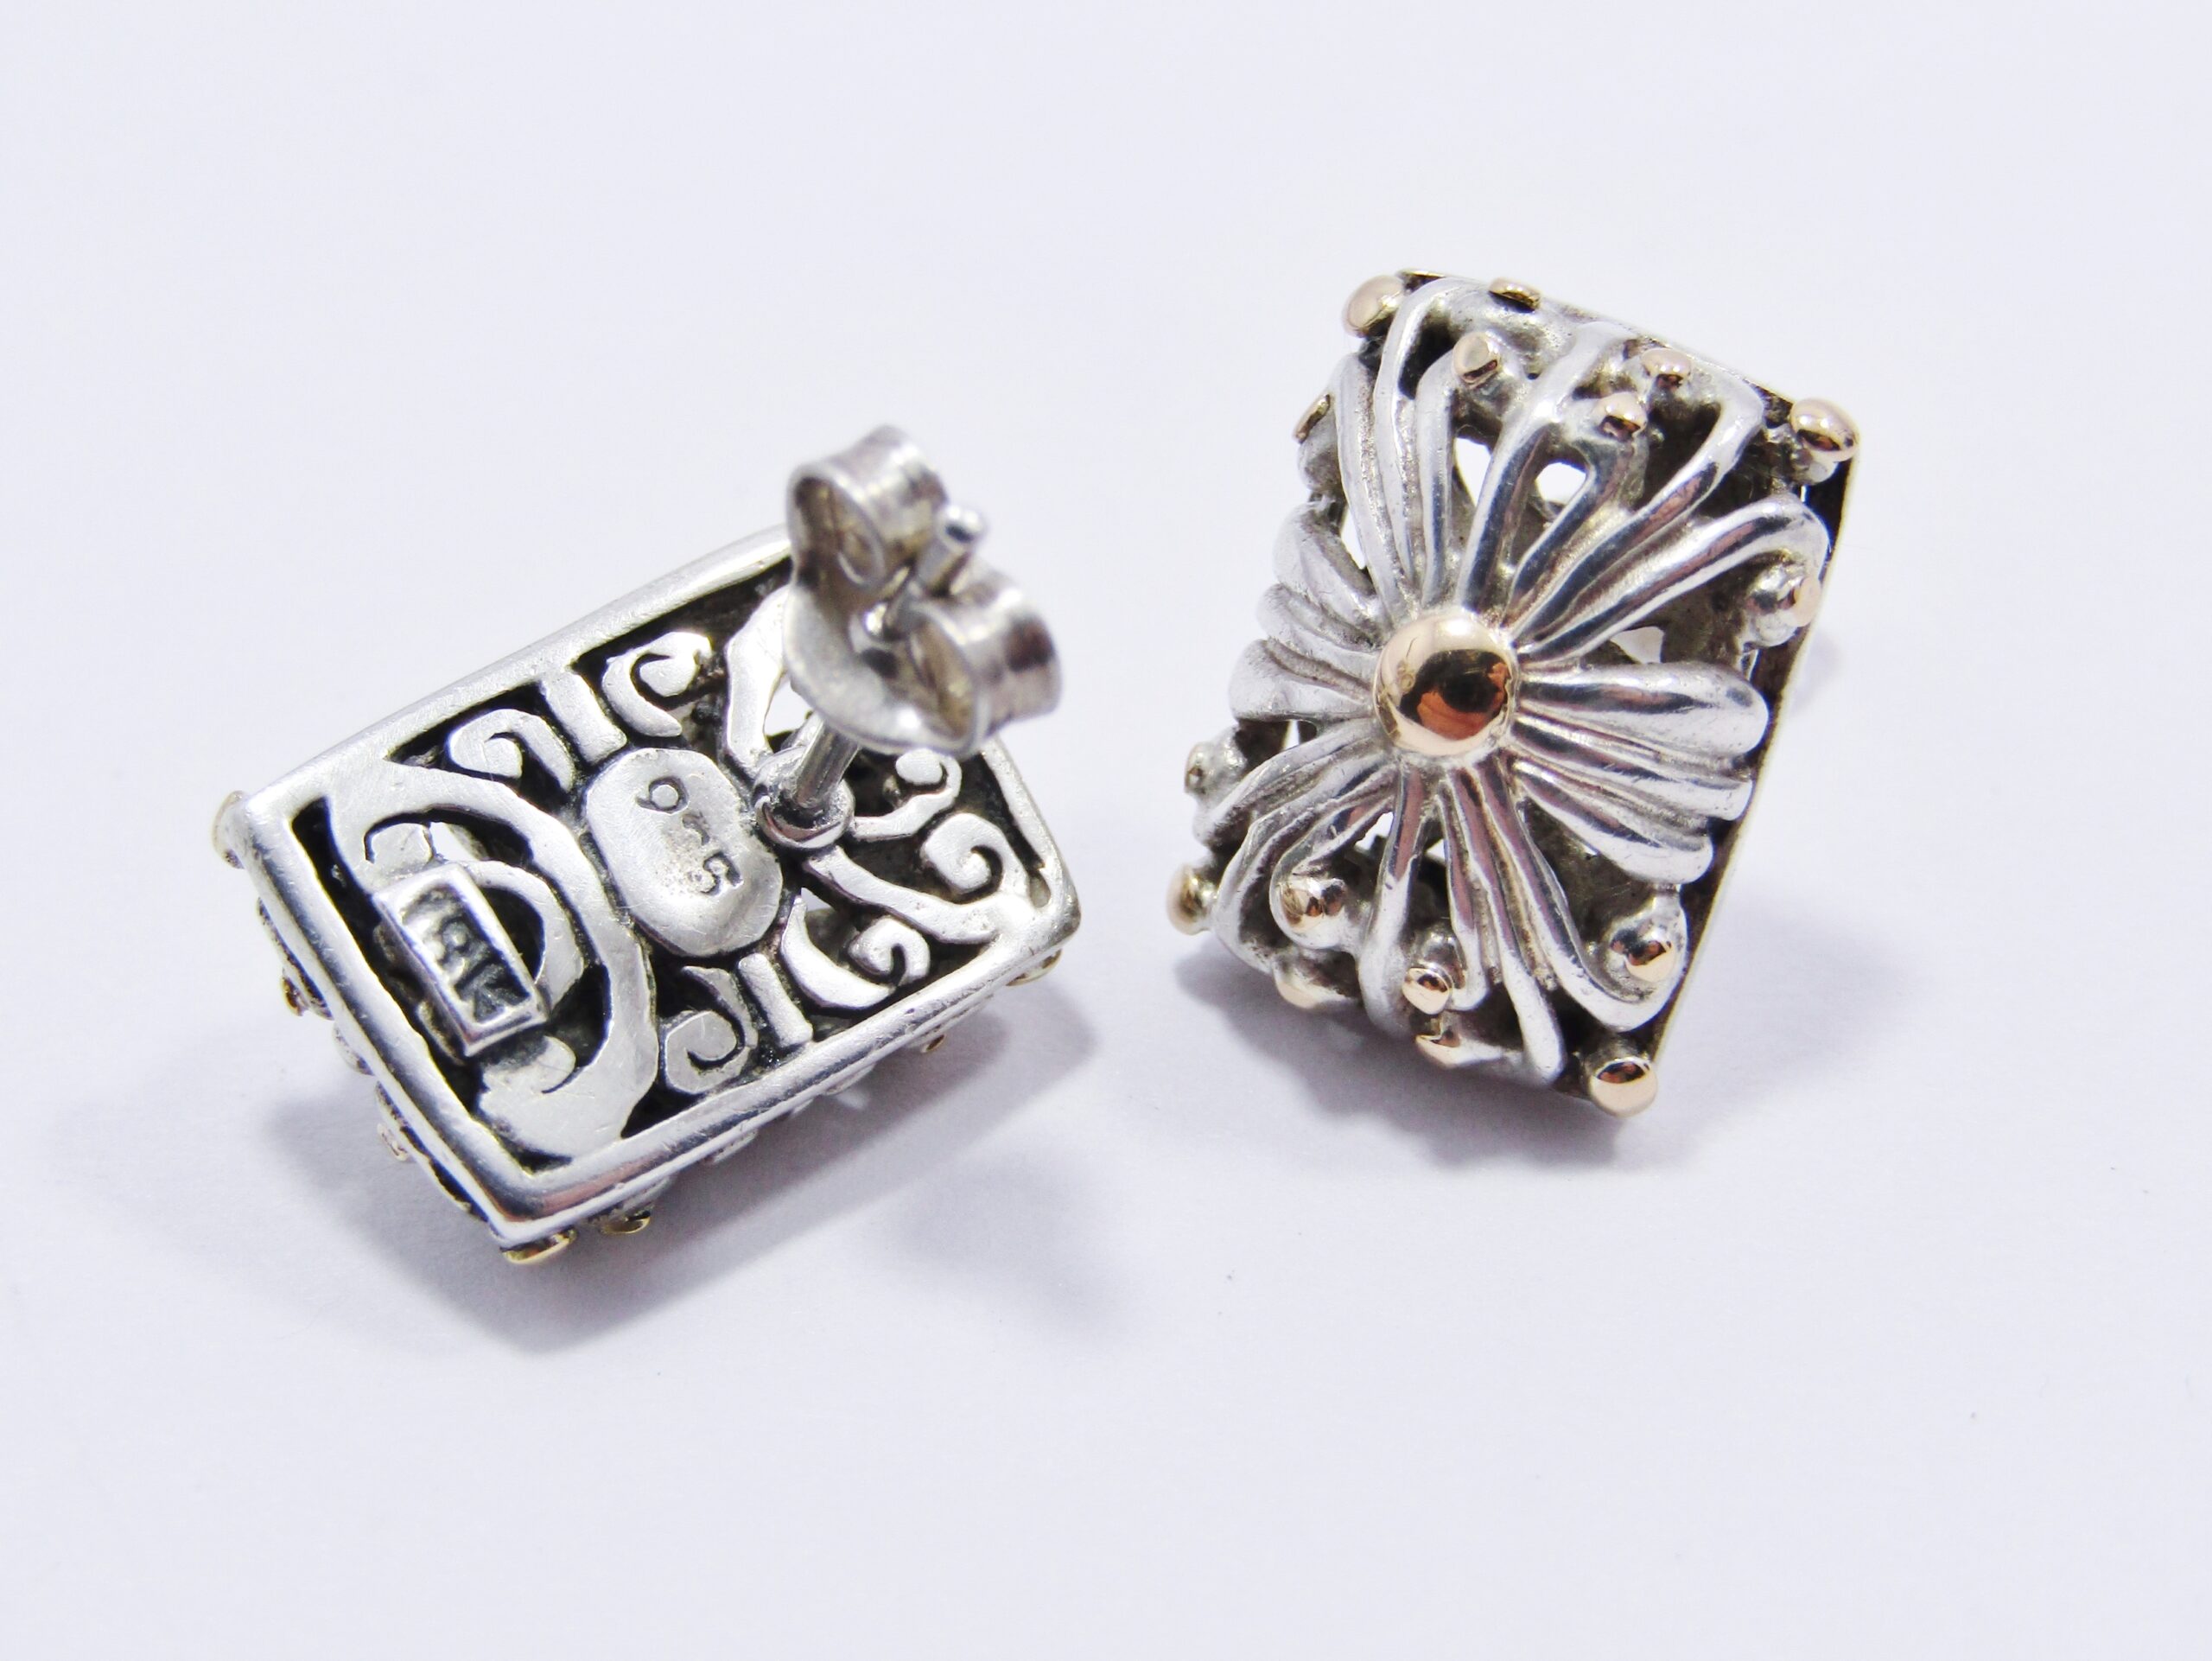 A Gorgeous Pair of Filigree Two Tone Earrings in Sterling Silver and 18ct Gold